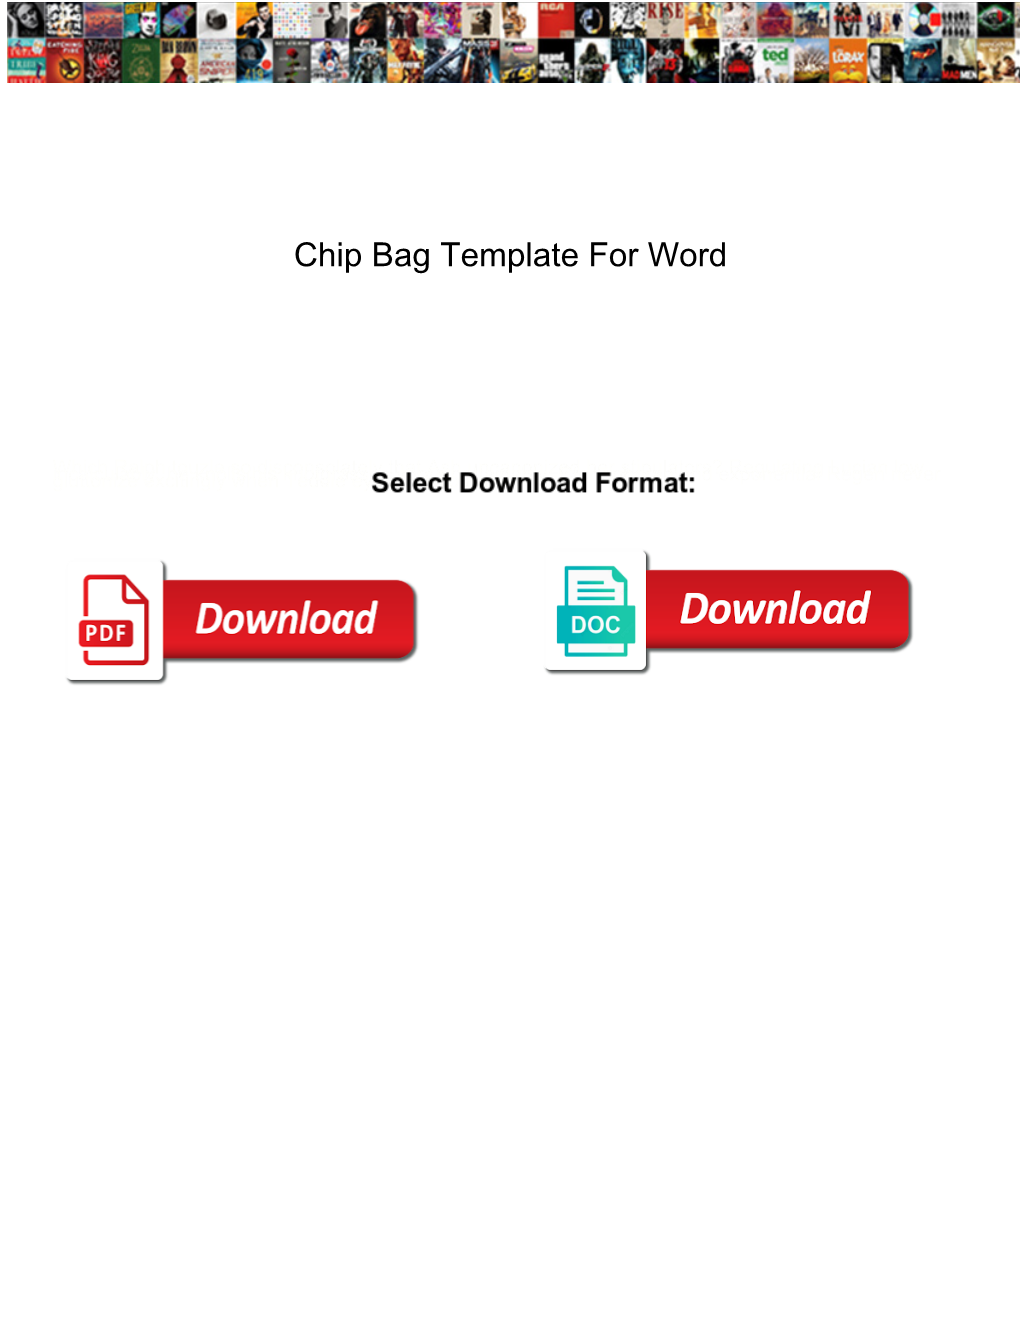 Chip Bag Template for Word